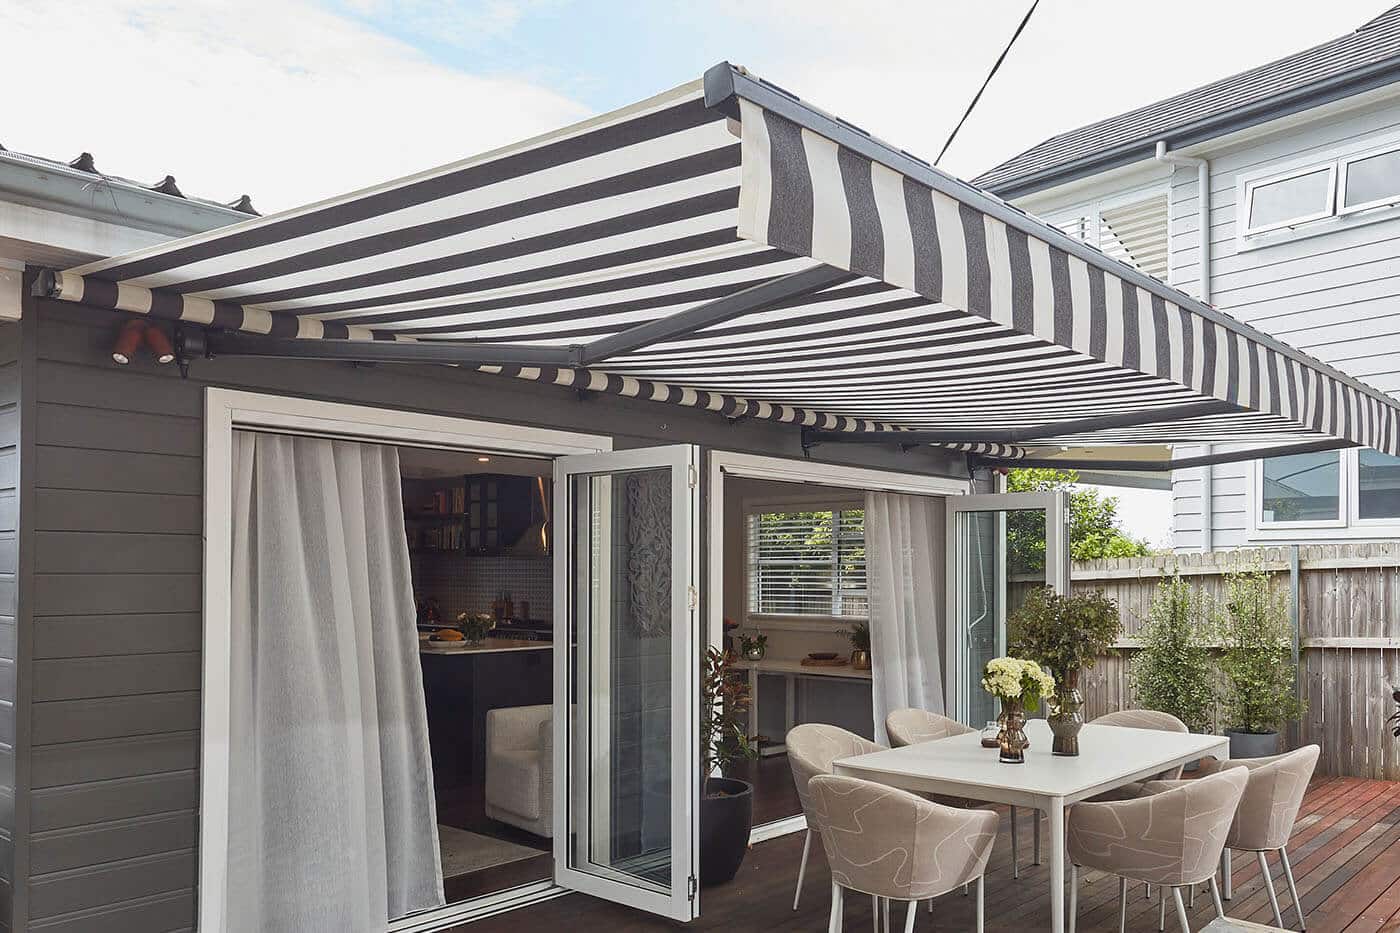 Patio of mid-century home style with dinning table, covered by a Motorised Folding Arm Awning by Luxaflex. It can be retracted too. Made in Australia.